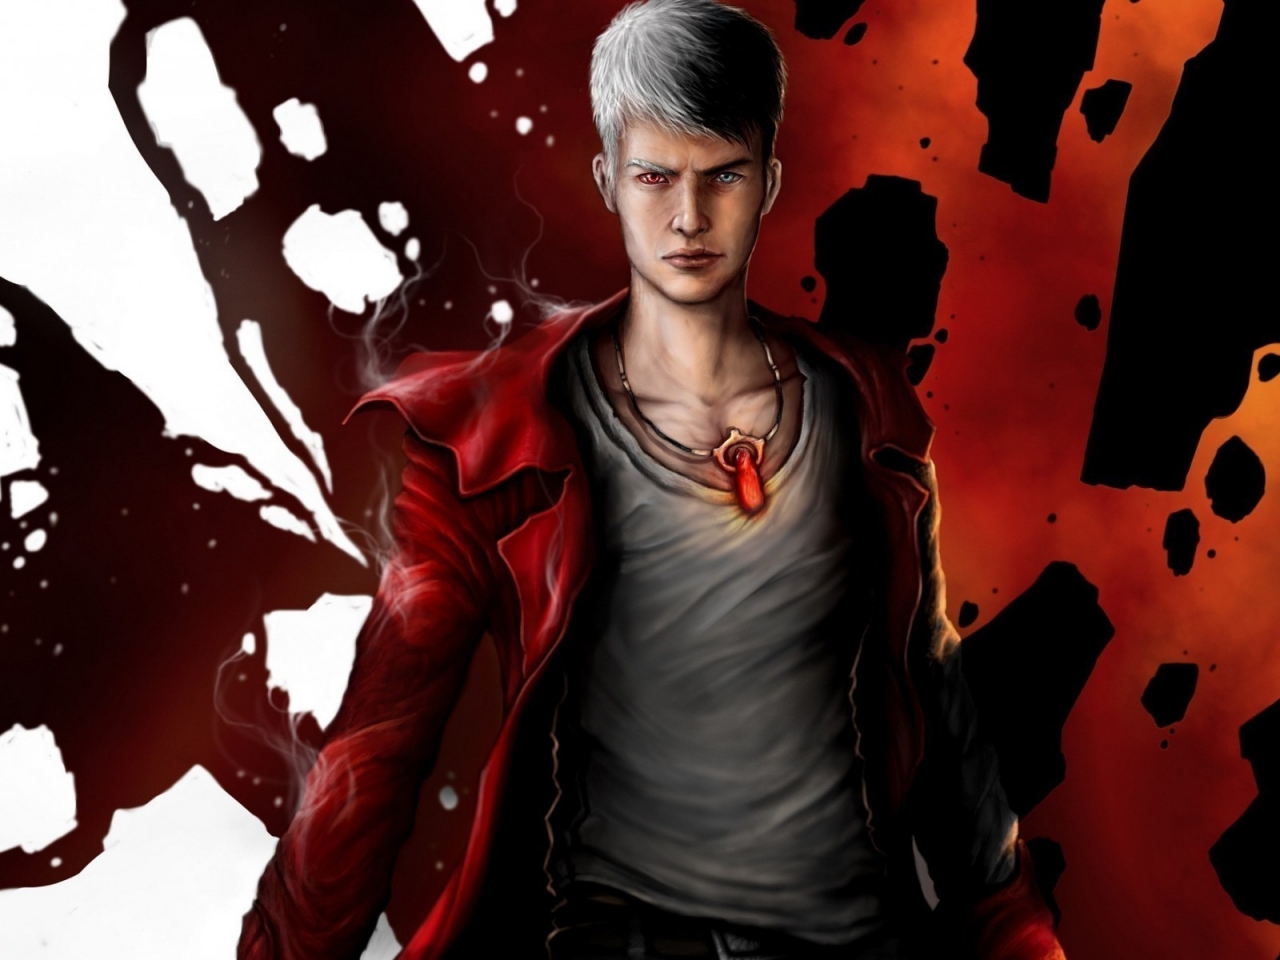 Dante from Devil May Cry for 1280 x 960 resolution